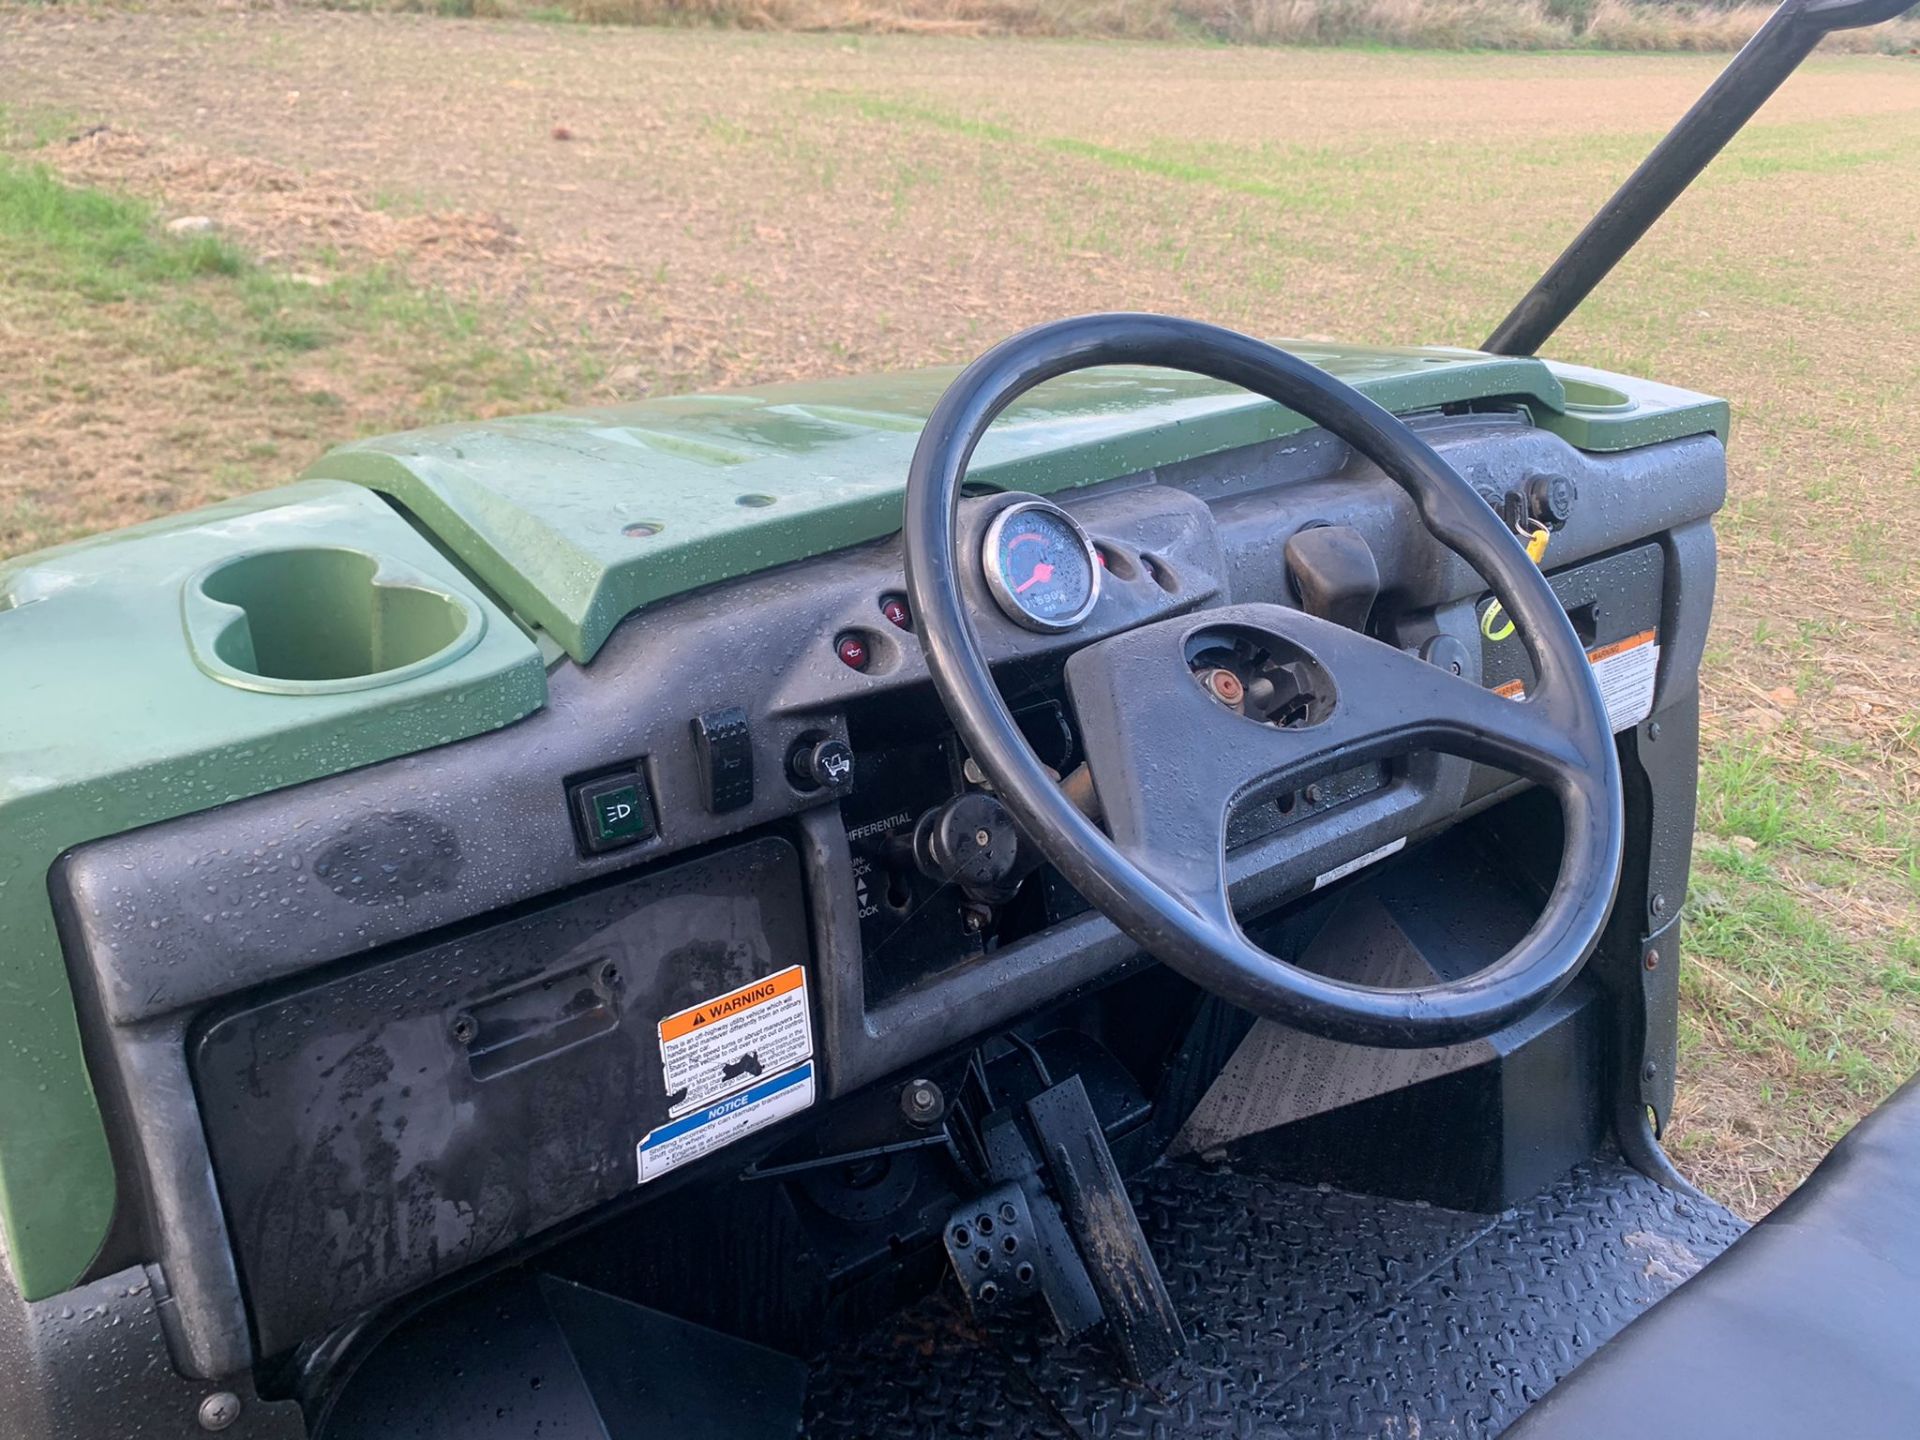 2013 KAWASAKI MULE 4010 4WD BUGGI, RUNS AND DRIVES, SHOWING A LOW 3500 HOURS *PLUS VAT* - Image 10 of 13